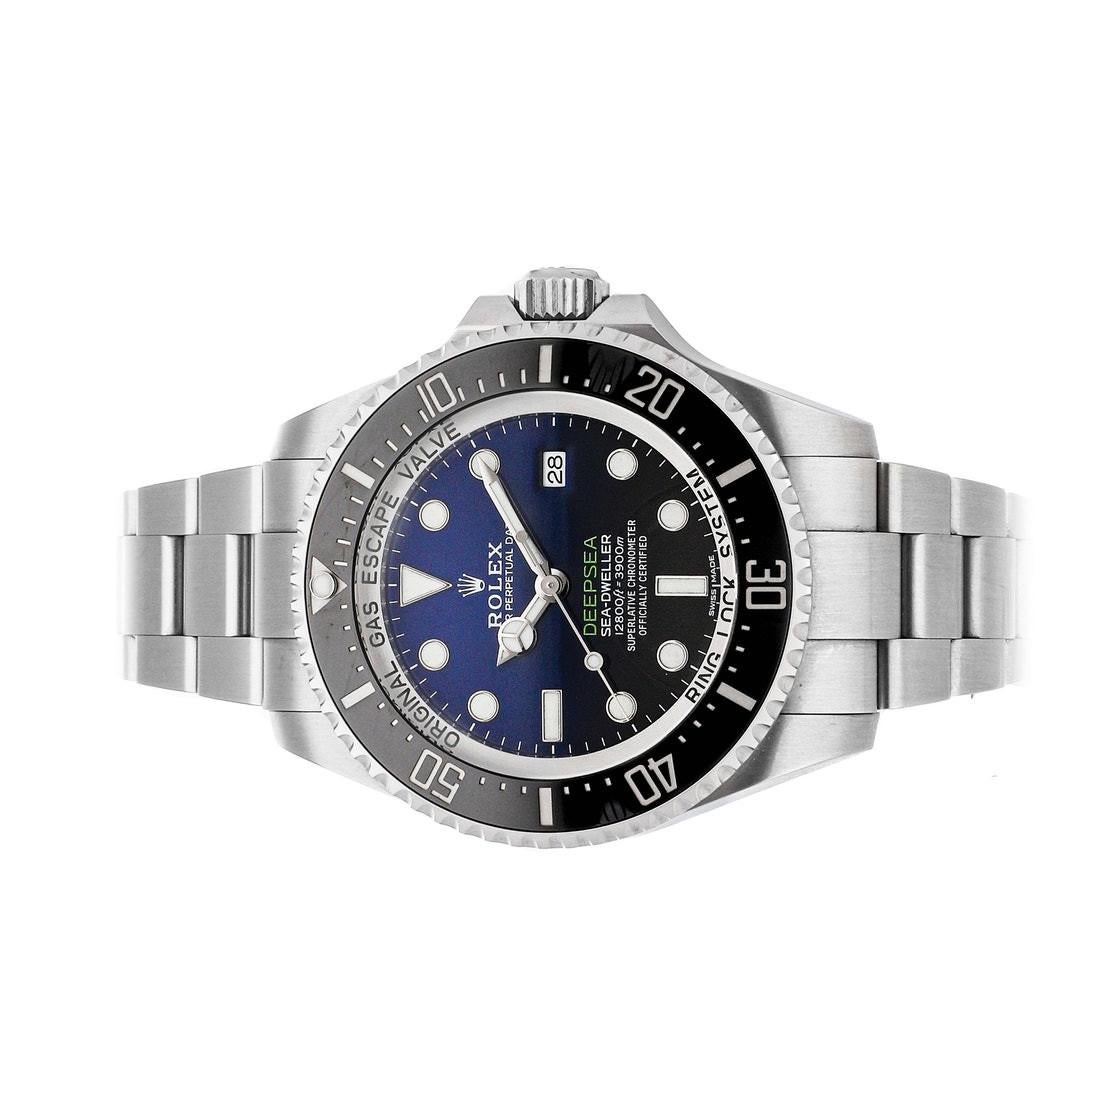 Rolex Sea-Dweller 126660, Blue Dial, Certified and Warranty In Excellent Condition For Sale In Miami, FL